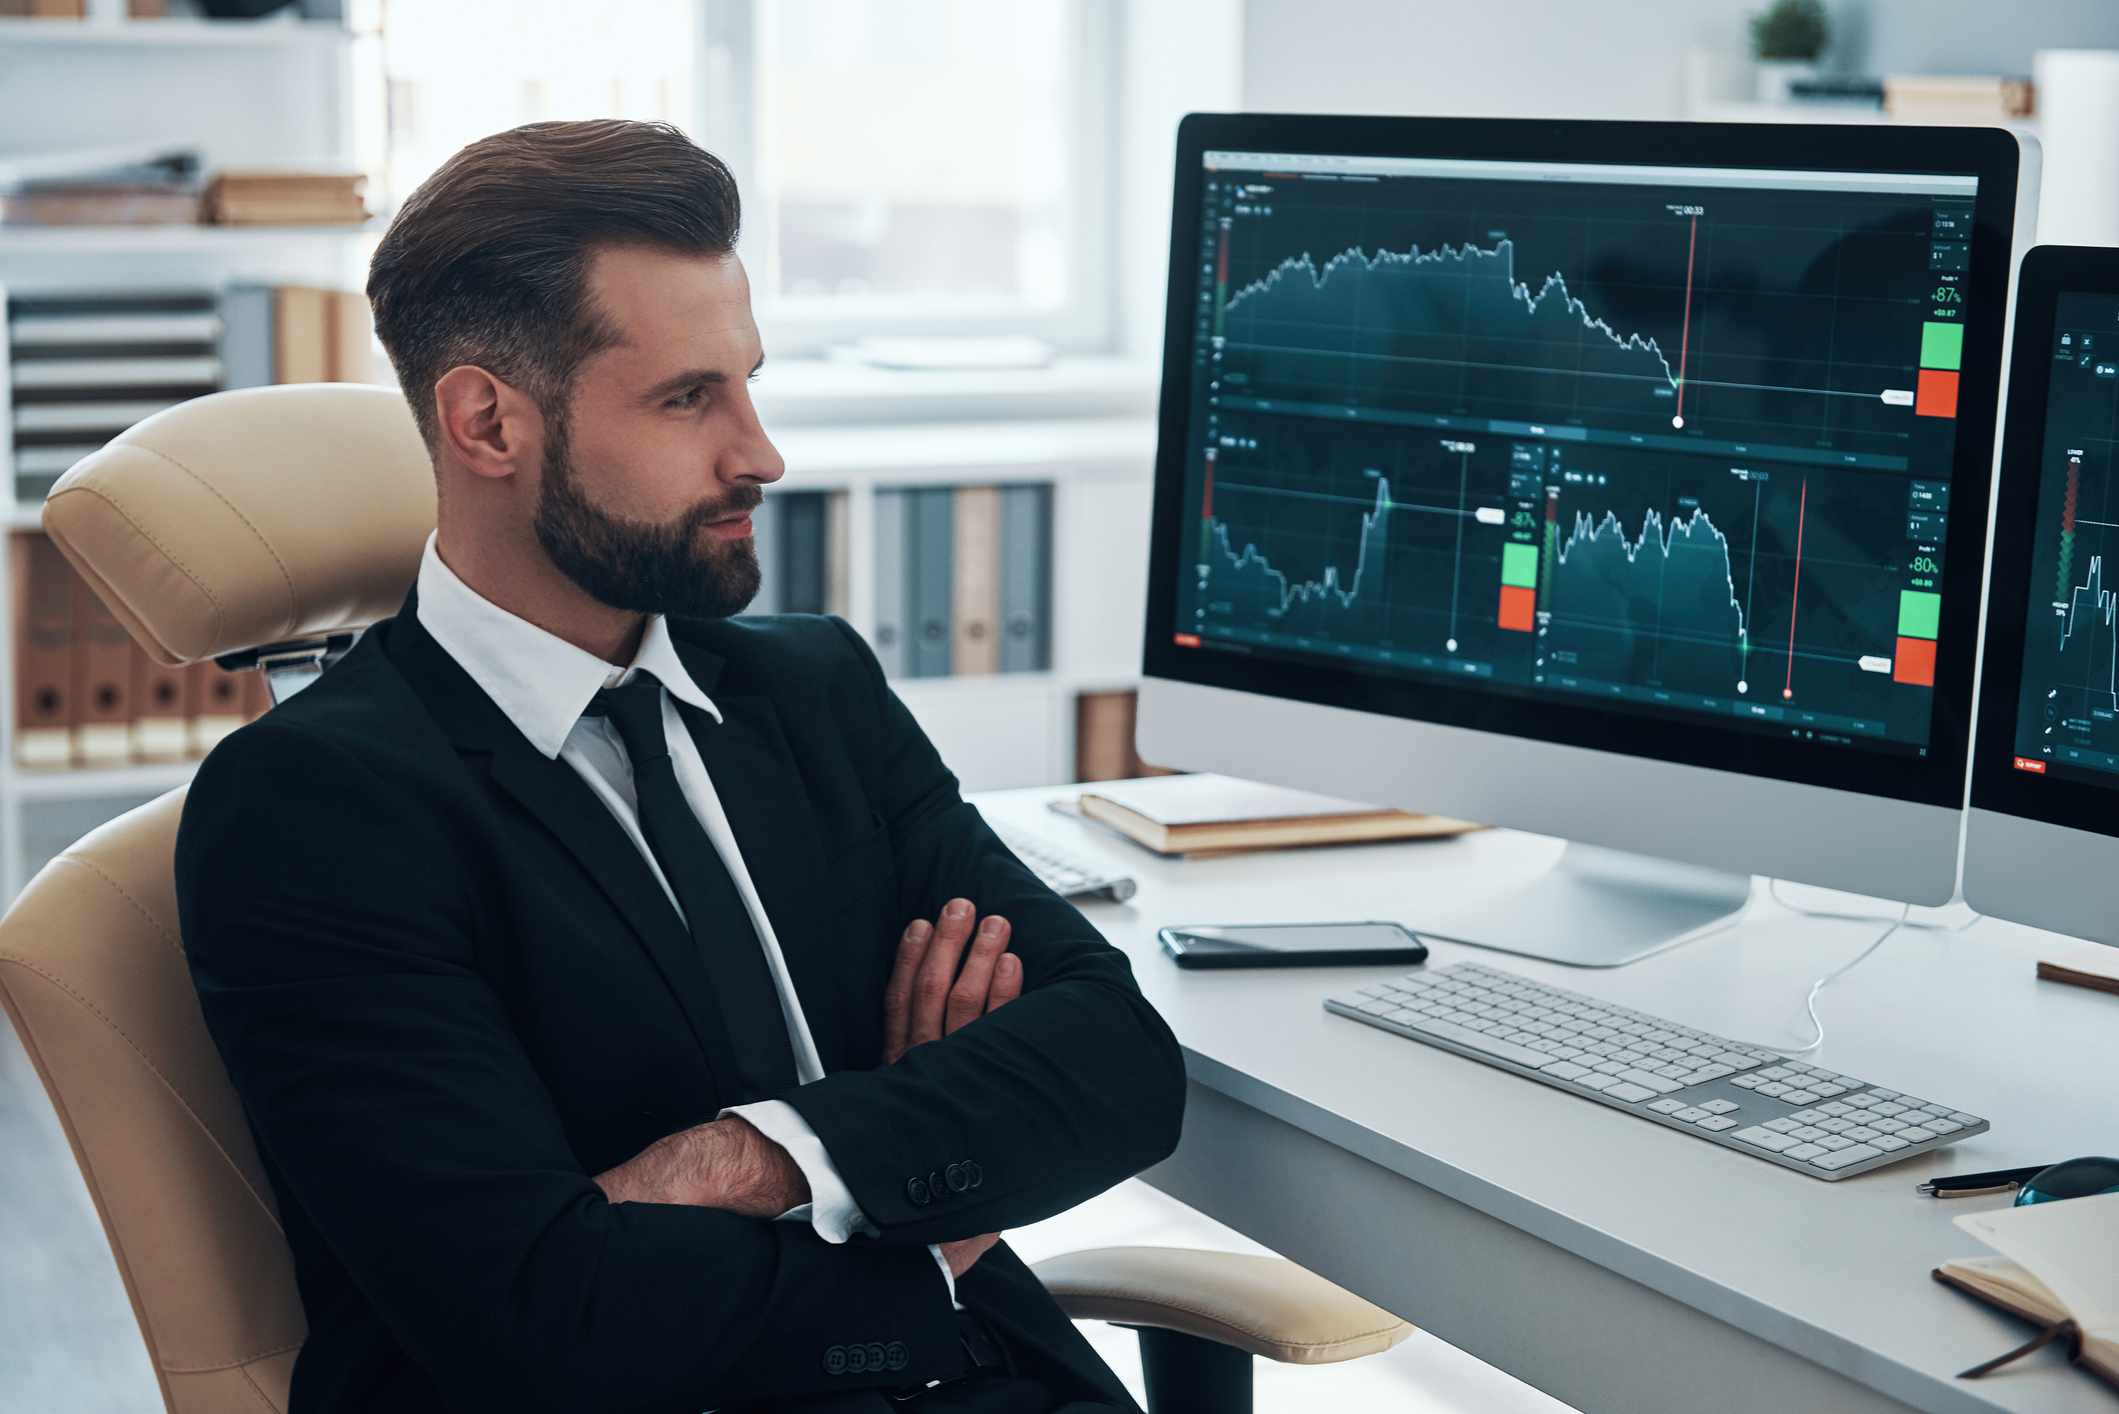 Young business man in suit looking at financial charts on computer monitor